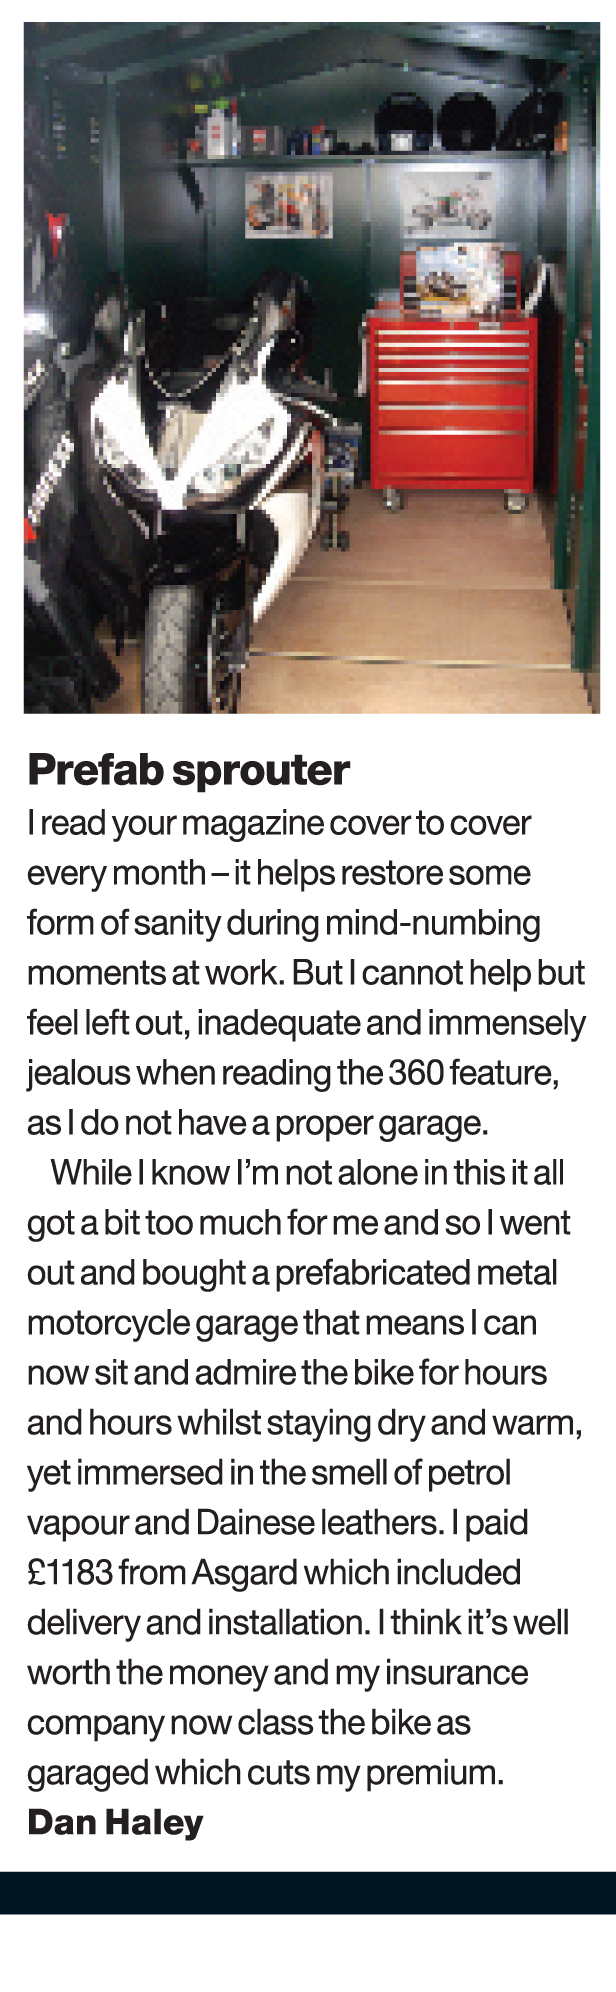 Motorbike shed magazine review